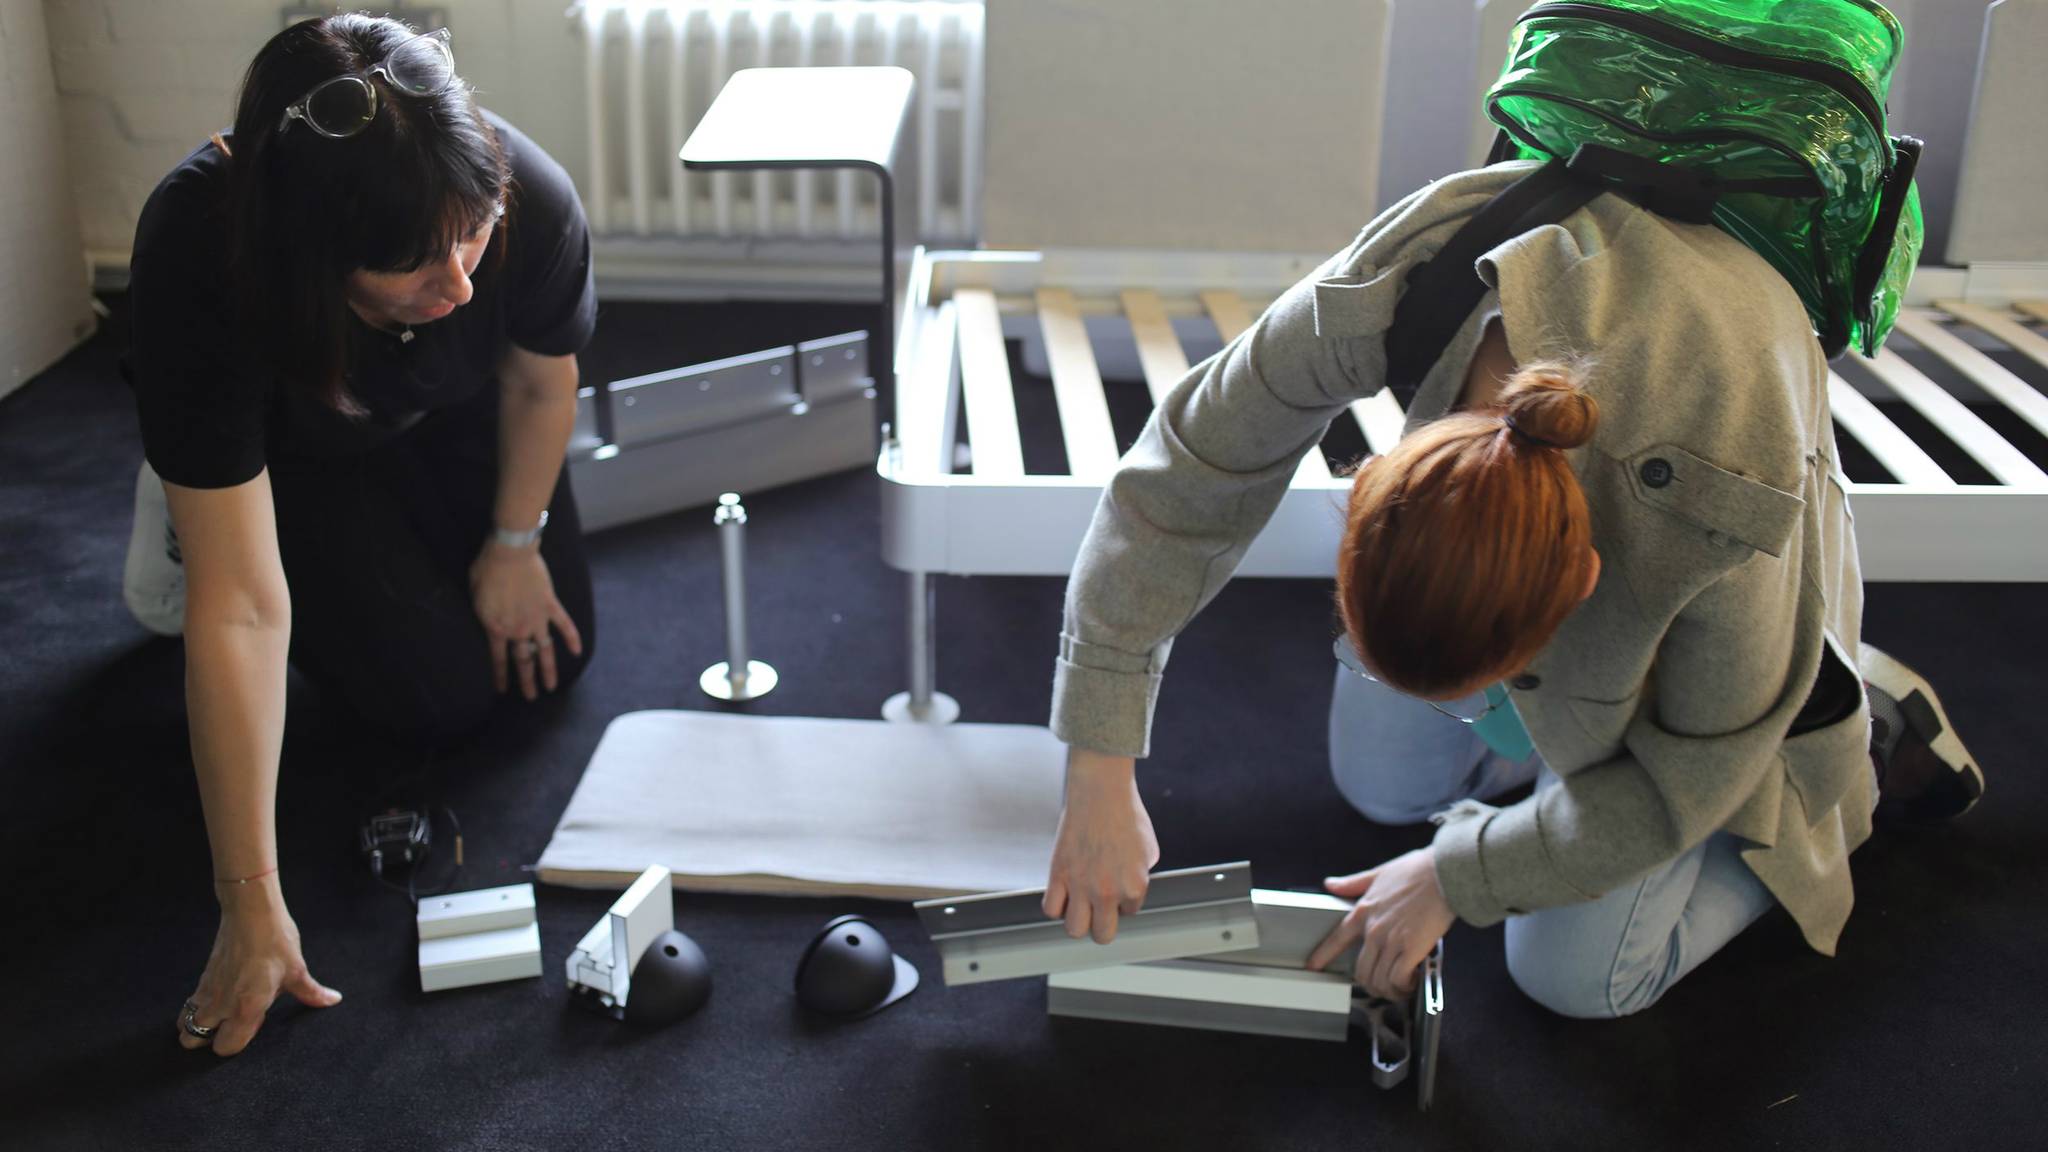 IKEA is making its furniture 'hackable'